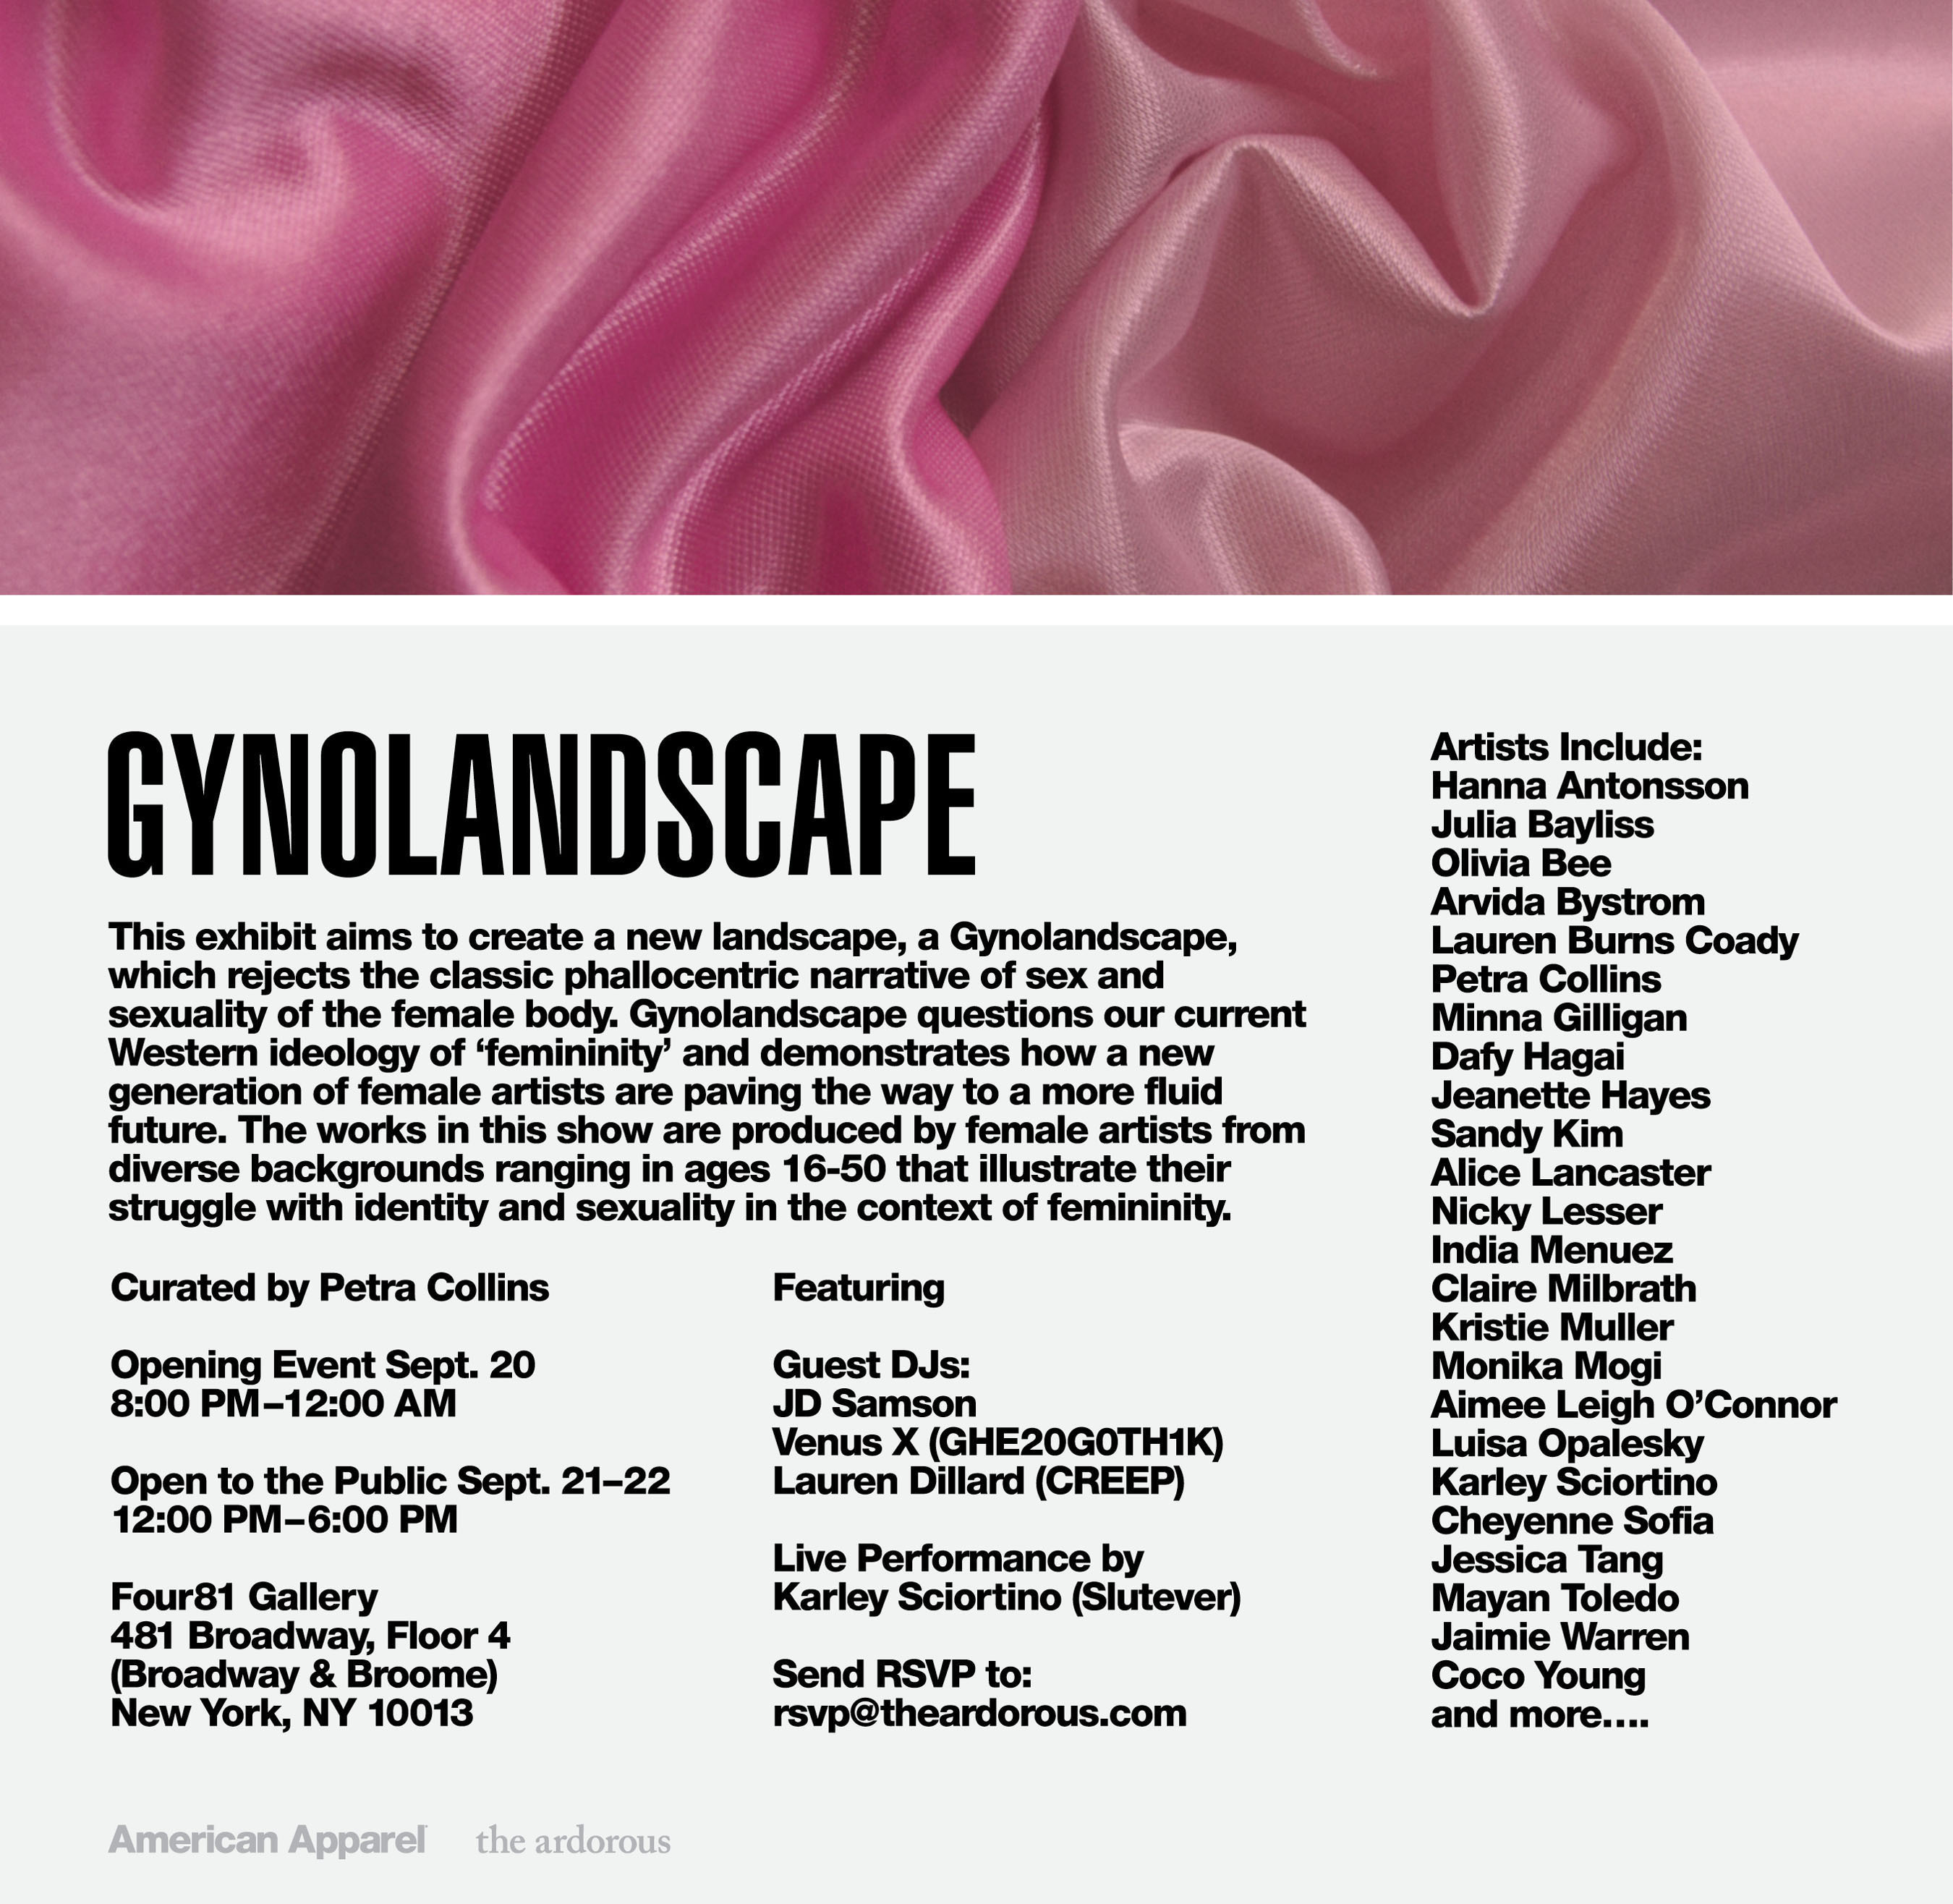 American Apparel (Amex: APP), the vertically-integrated clothing manufacturer based in downtown Los Angeles, is pleased to announce its sponsorship of the new female-centric art exhibition, "Gynolandscape." The all-girl show, curated by photographer--and longtime American Apparel employee--Petra Collins, will take place from September 20th to 23rd, at Four81 in SoHo, NYC. The exhibit, featuring a lineup of artists from The Ardorous, has been designed and cultivated by Petra Collins, a Toronto-born artist who has worked with Vogue Italia, Purple, Vice and Rookie, and is still a contributing photographer for American Apparel. (PRNewsFoto/American Apparel) (PRNewsFoto/AMERICAN APPAREL)